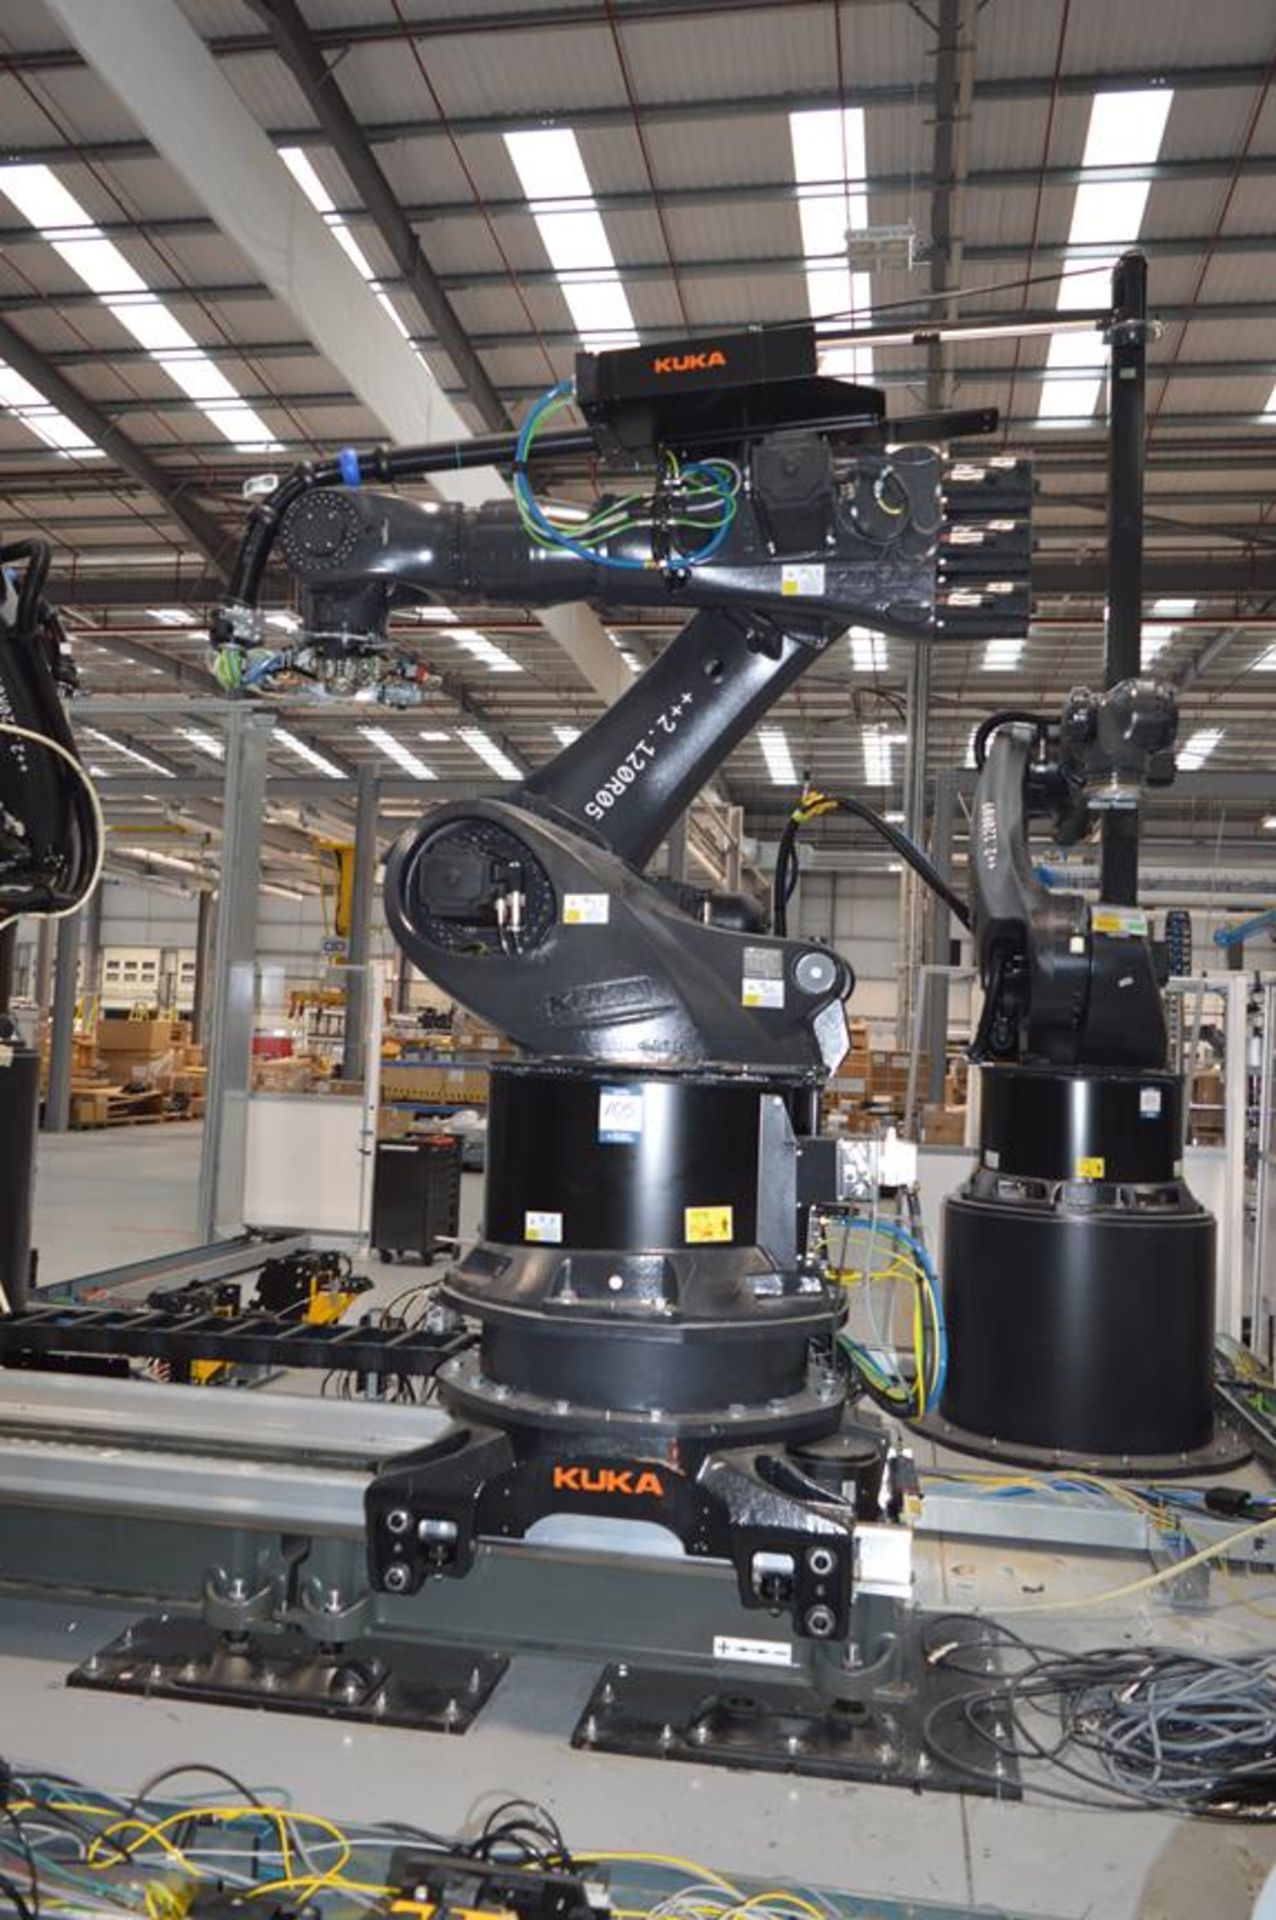 Kuka, KR280 R3080 FLR six axis robot on extended pedestal, Serial No. 4380728 (DOM: 2021)